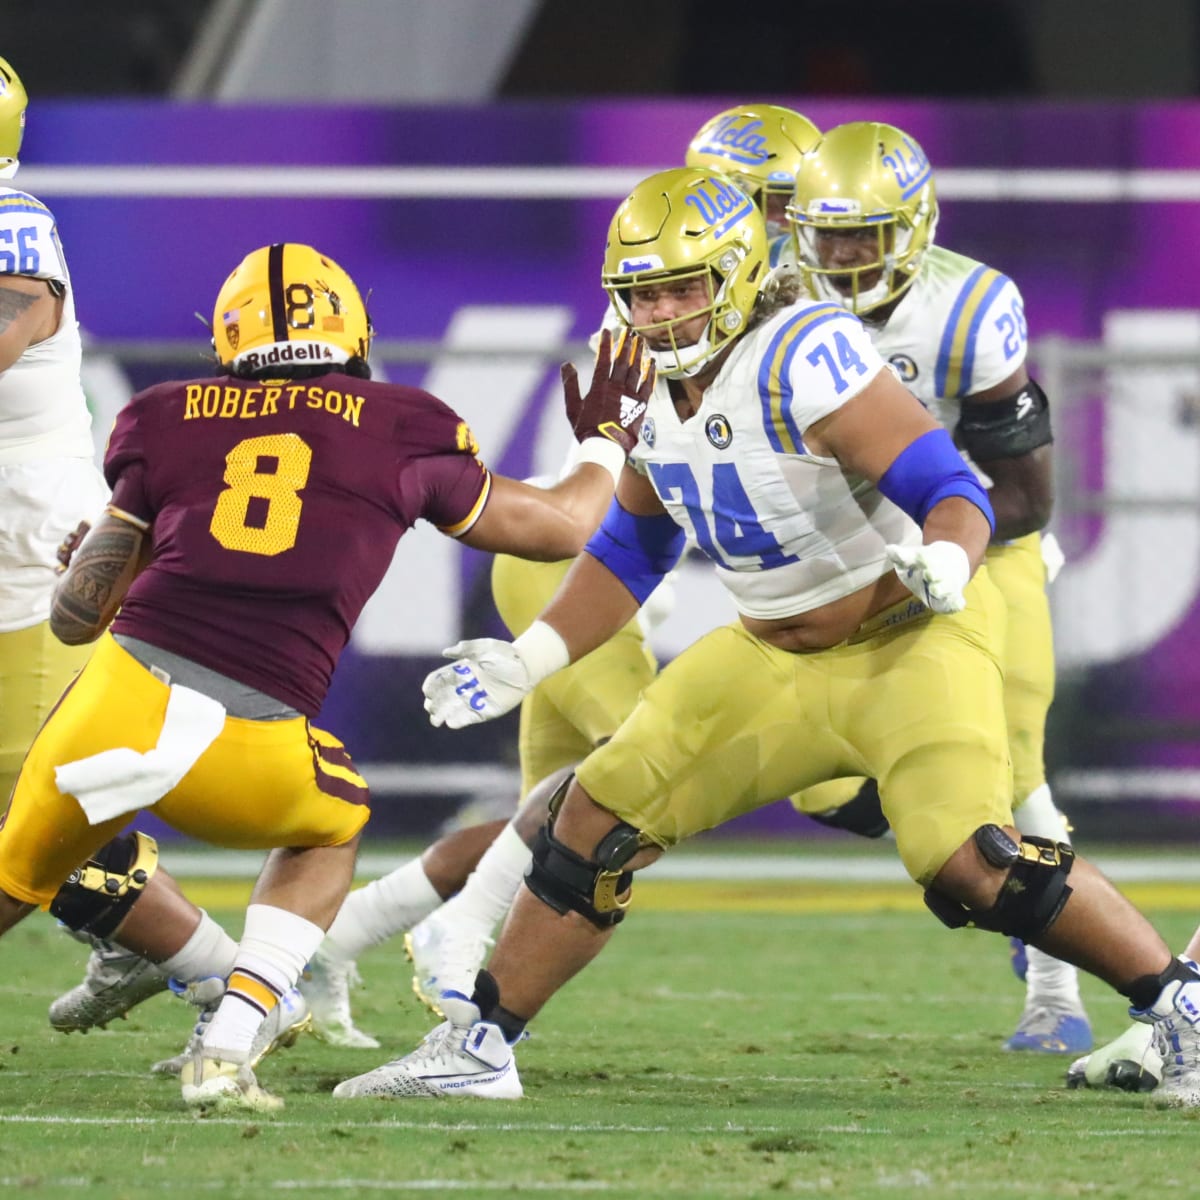 UCLA Football: Most Underrated Player by Position - Offensive Line